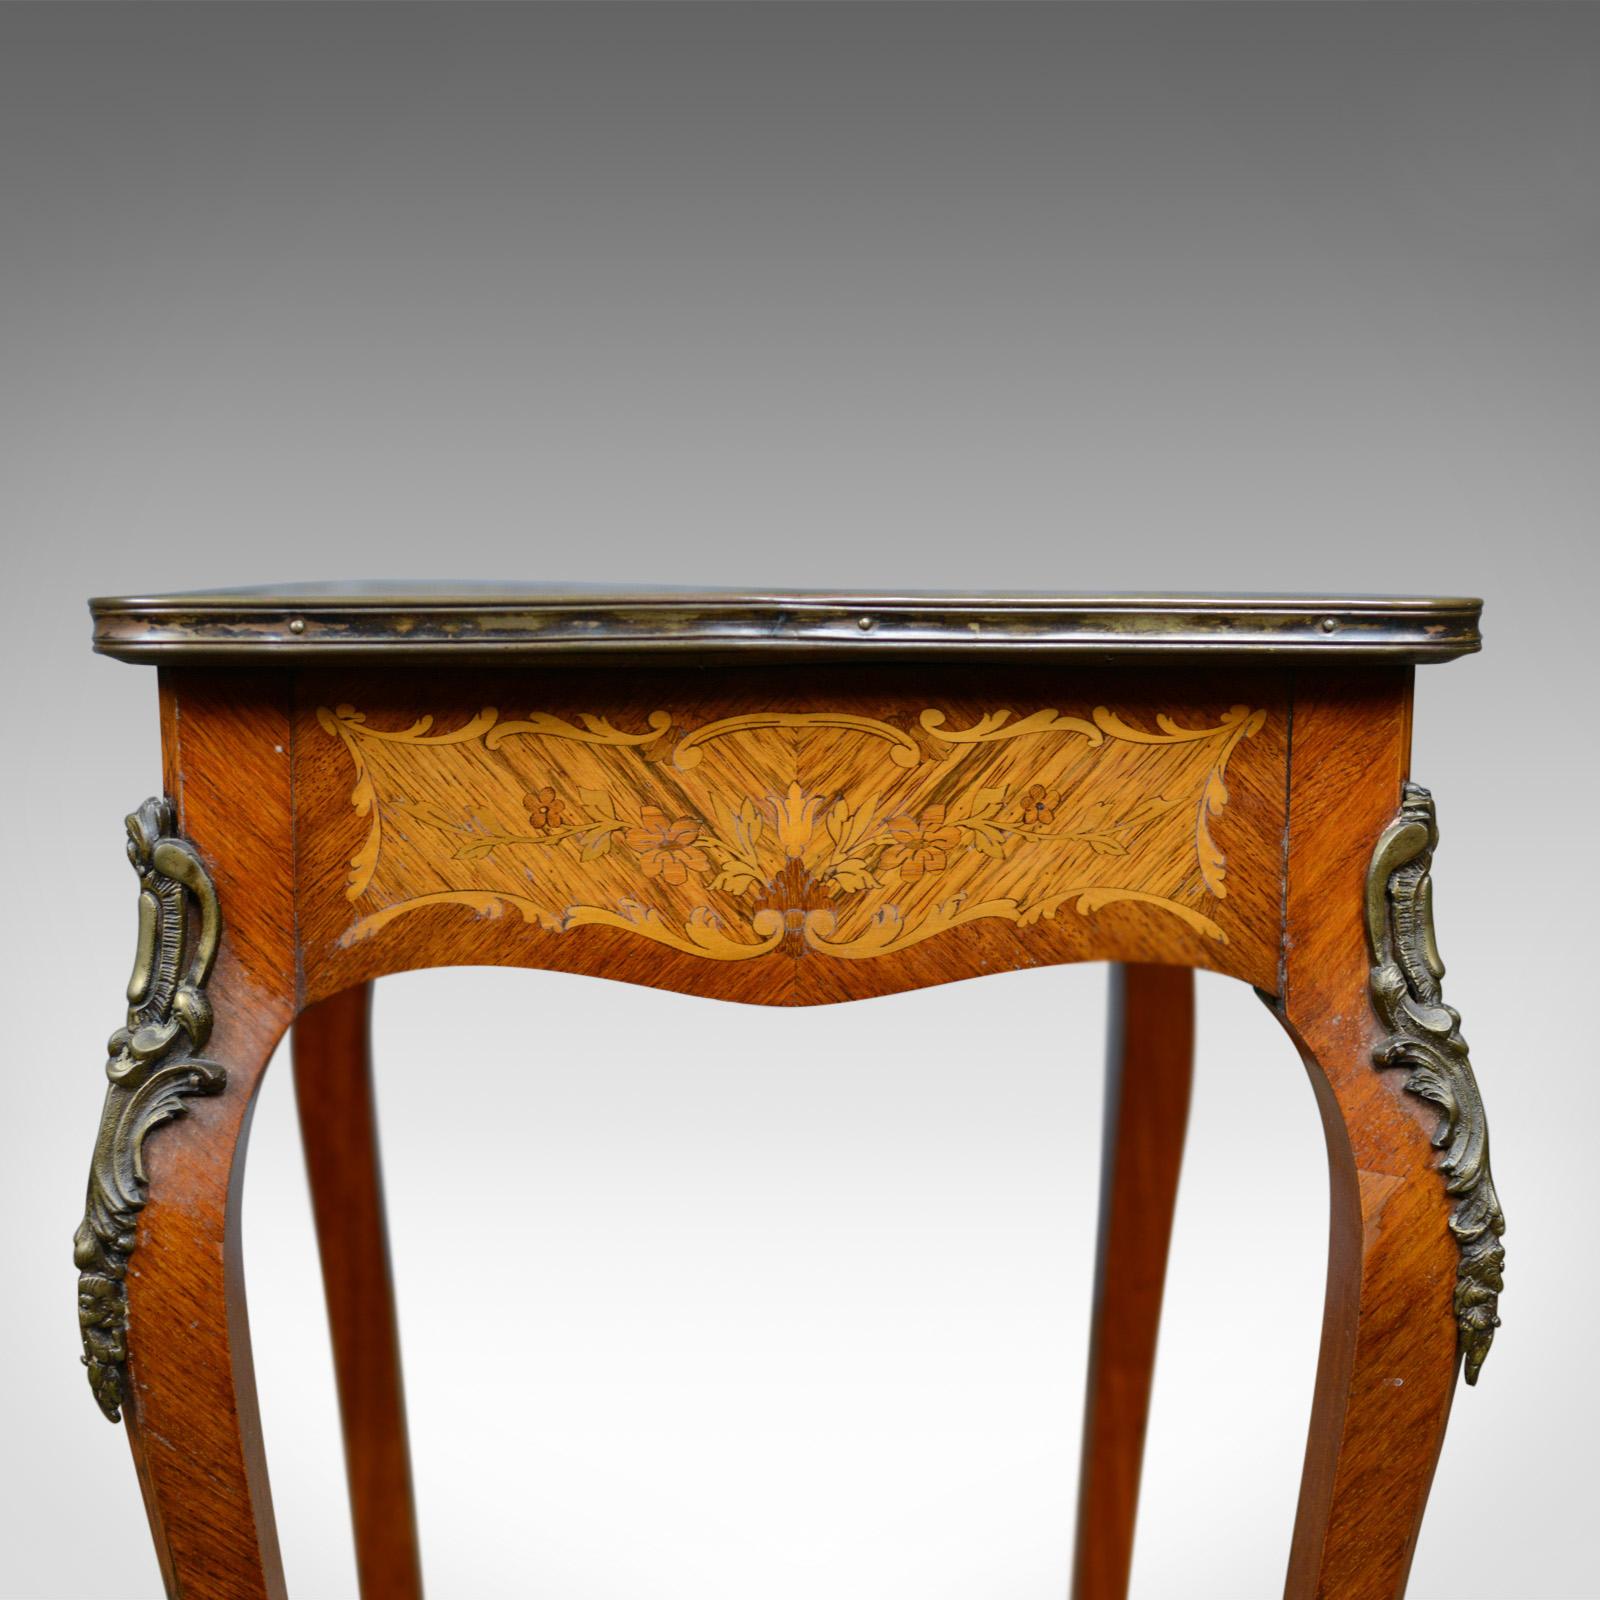 19th Century French Antique Étagère, Kingwood Side Table, Nightstand, Druce & Co., circa 1870